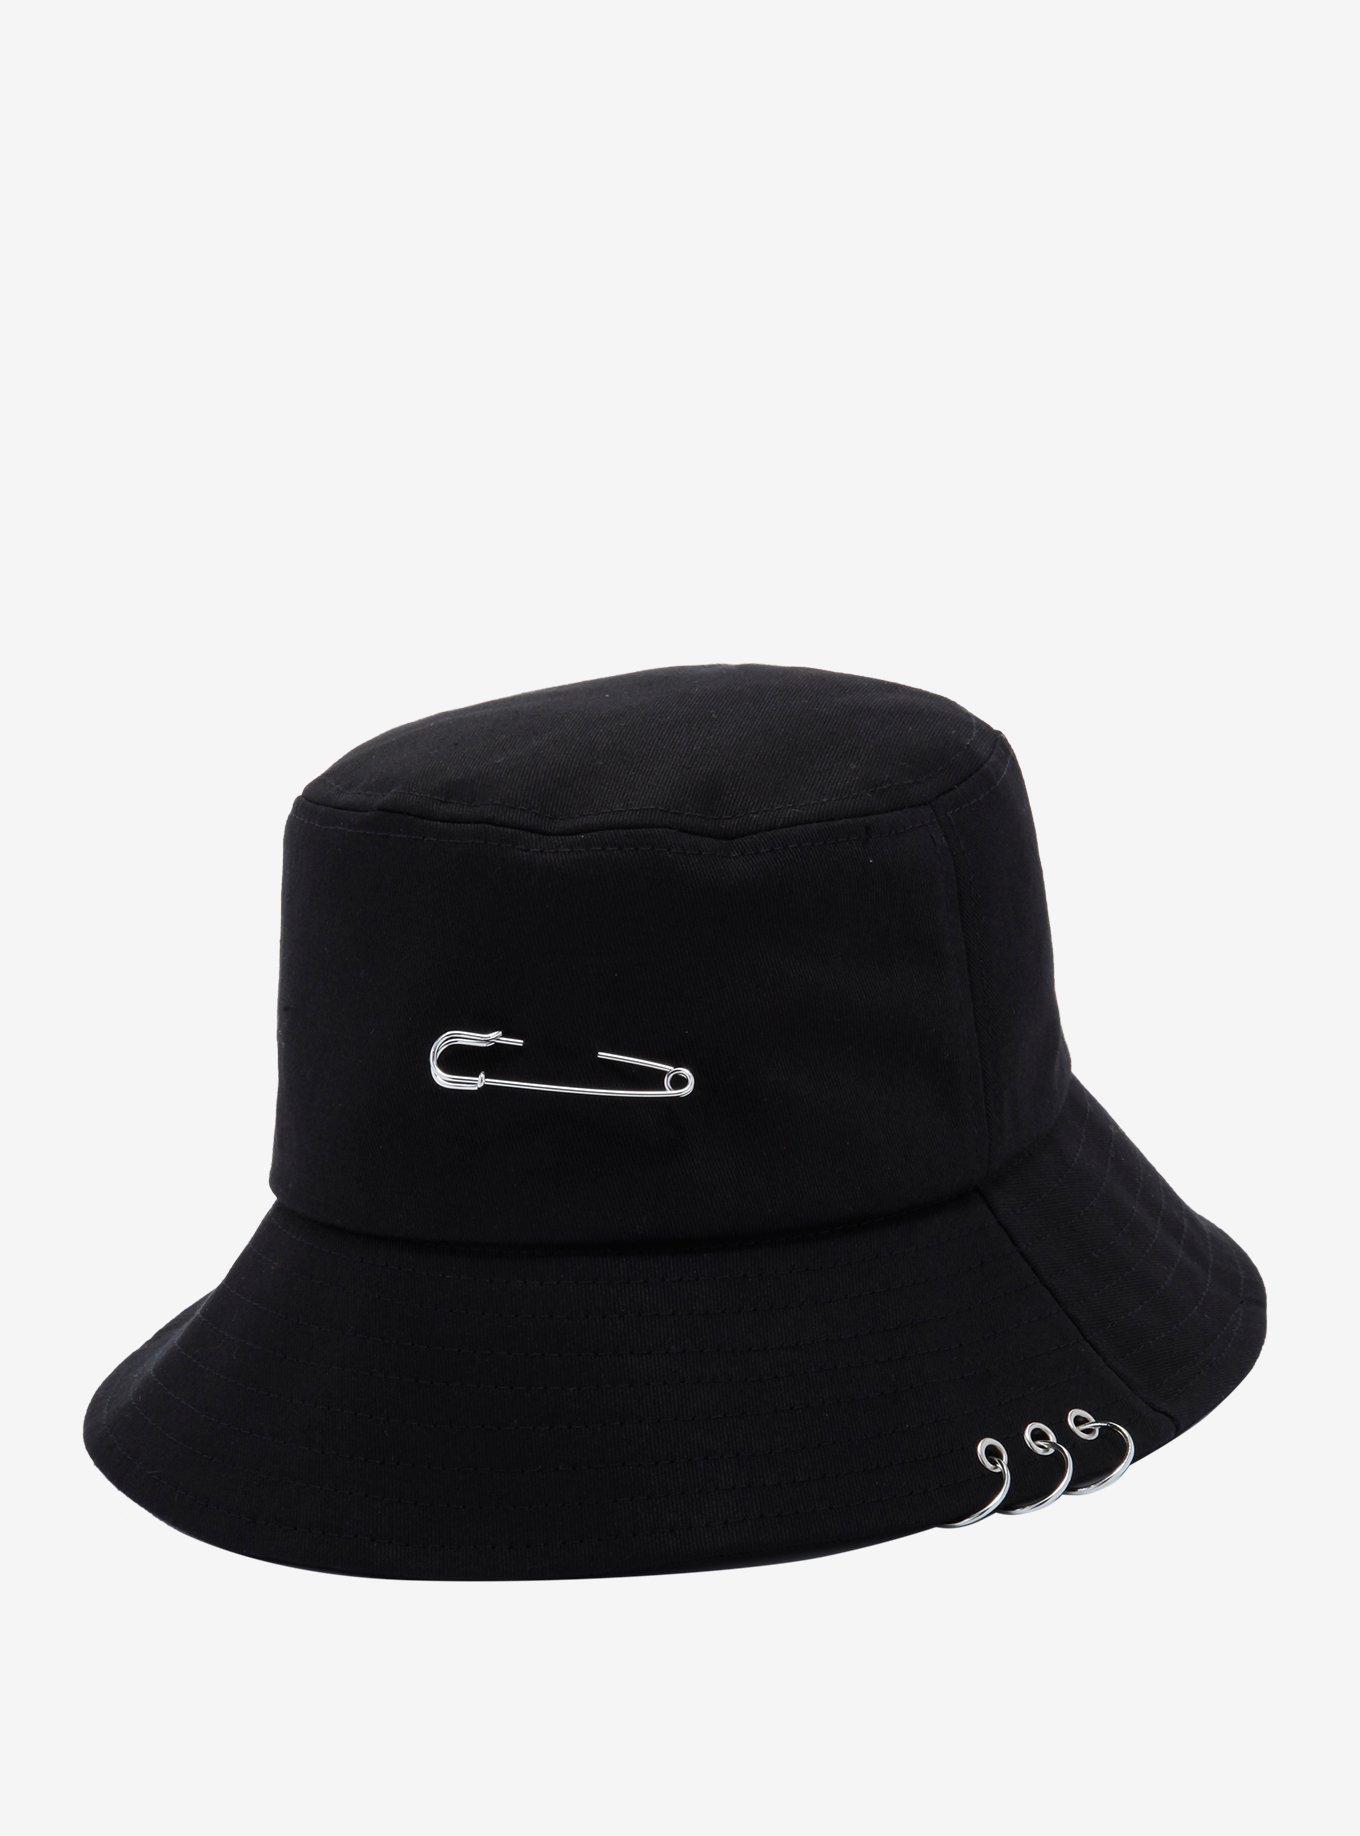 Pin on Hats